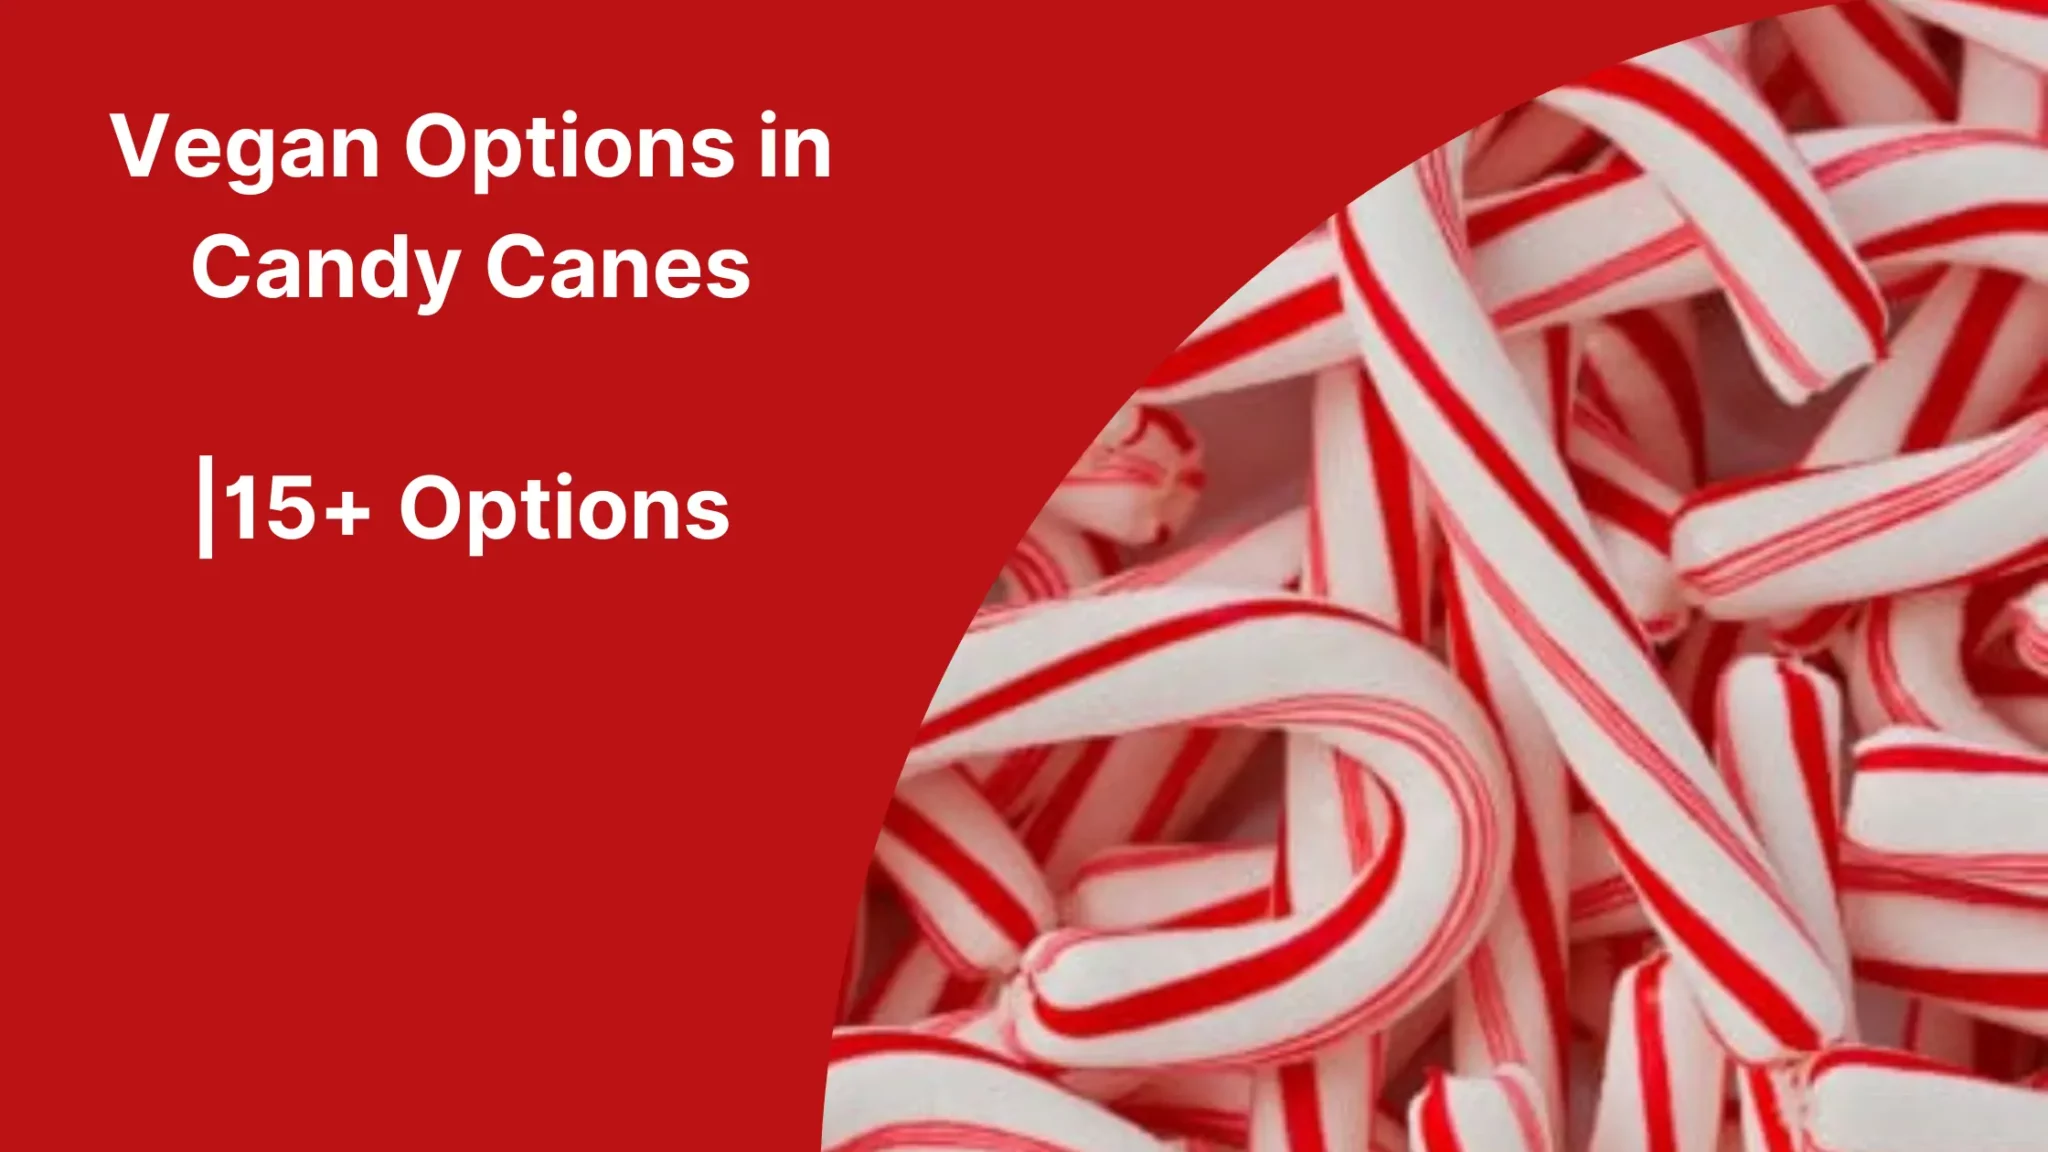 Vegan Options in Candy Canes